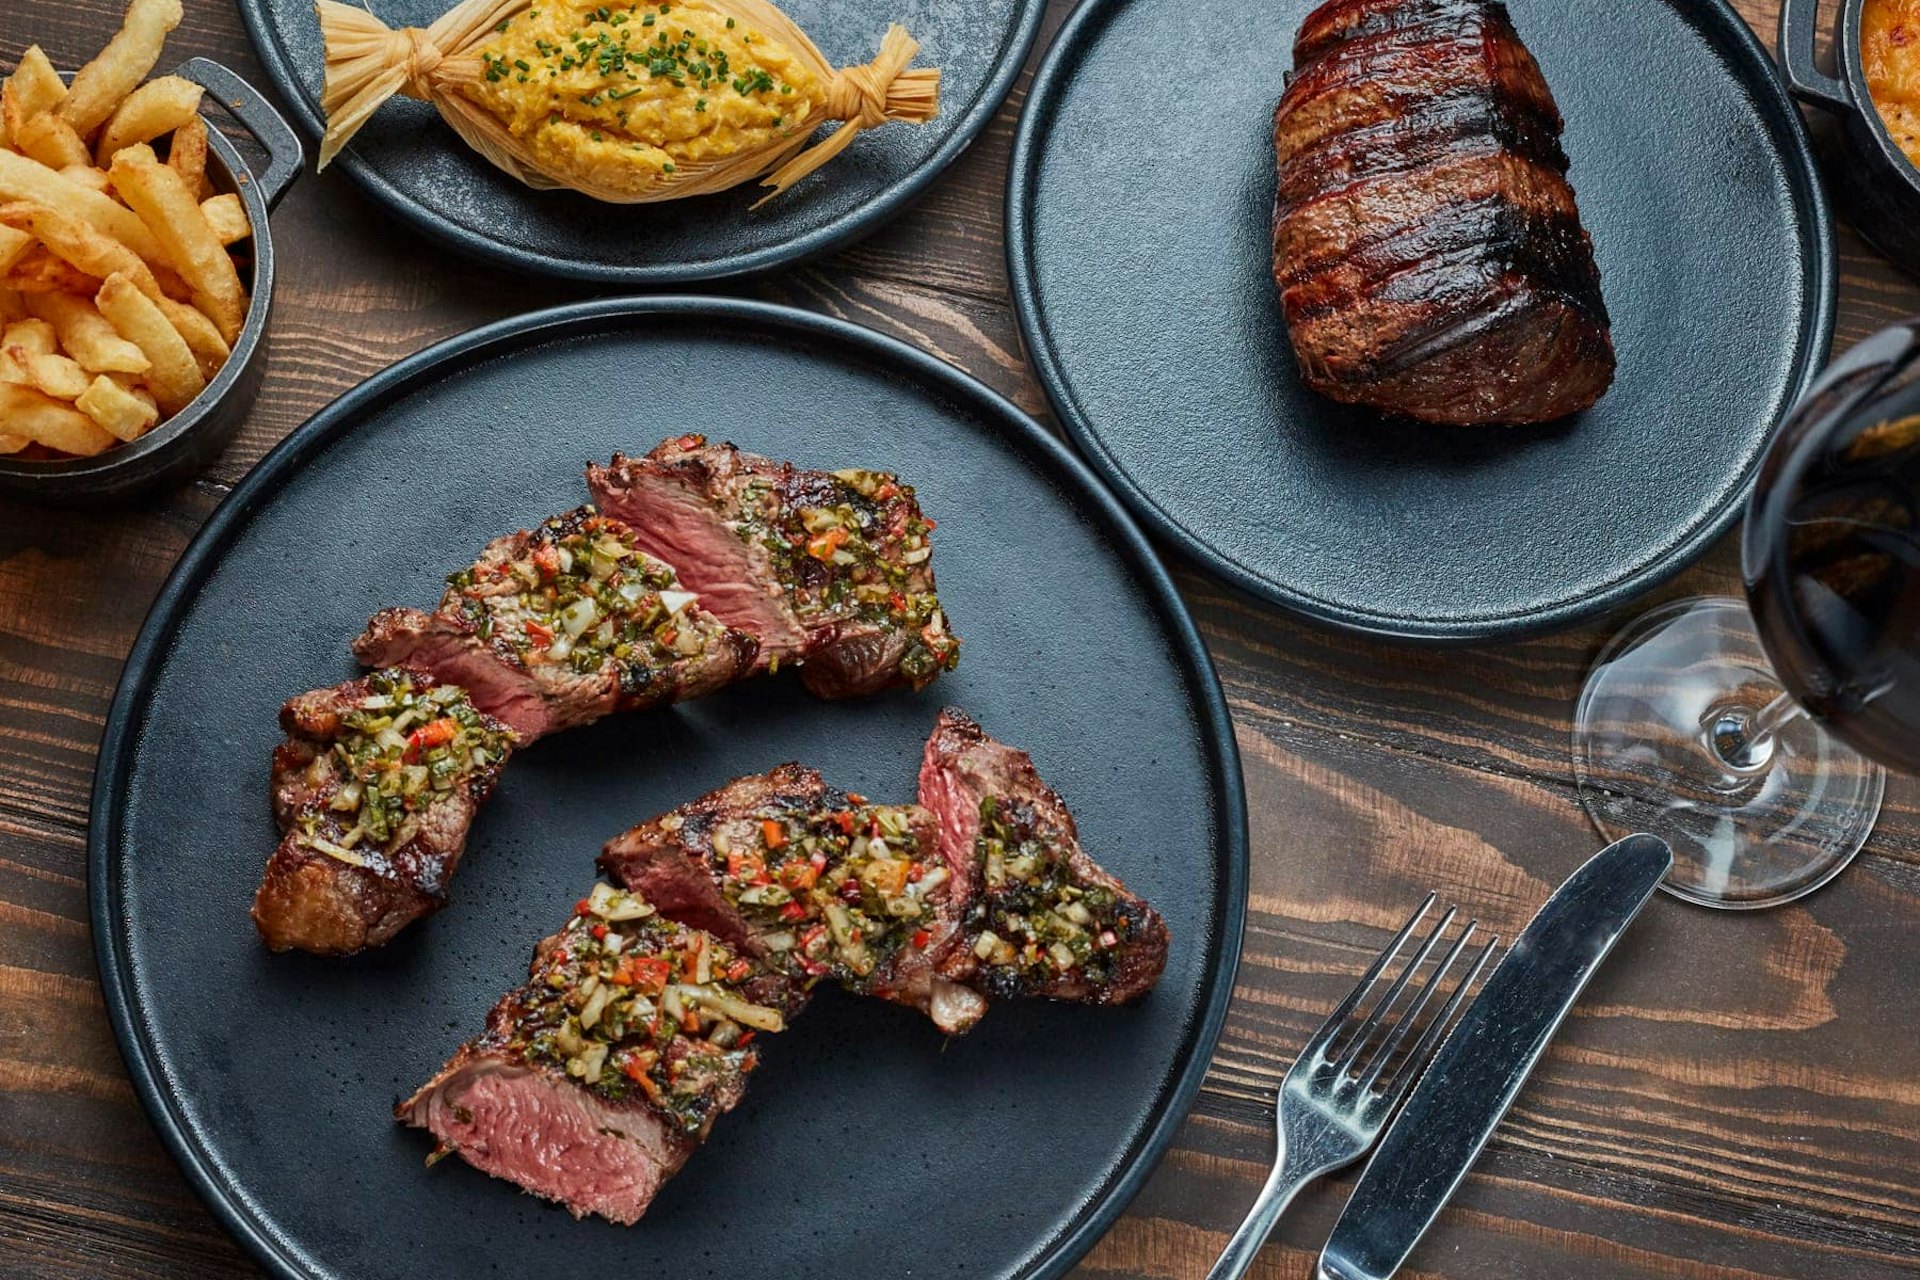 Chateaubriand at Gaucho restaurant, London